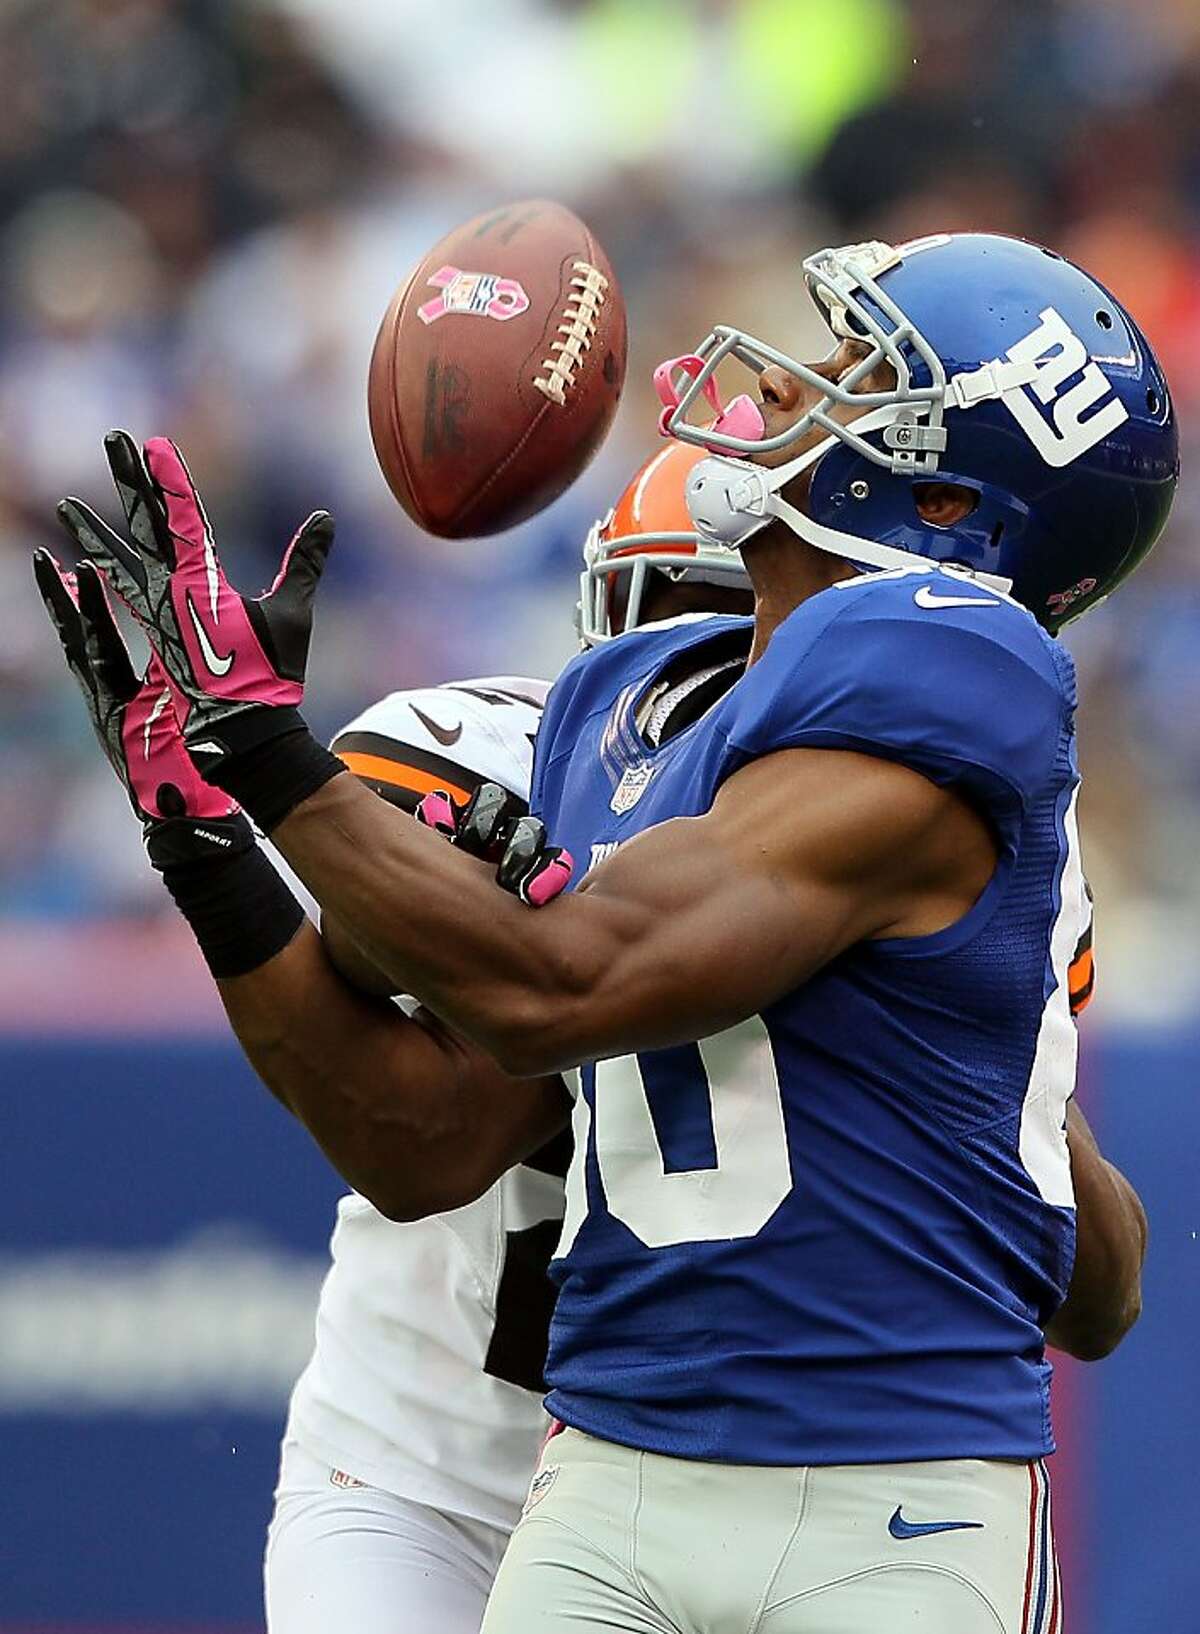 EAST RUTHERFORD, NJ - OCTOBER 07: Wide receiver Victor Cruz #80 of the New York Giants makes a catch against the Cleveland Browns during their game at MetLife Stadium on October 7, 2012 in East Rutherford, New Jersey. (Photo by Alex Trautwig/Getty Images) *** BESTPIX ***